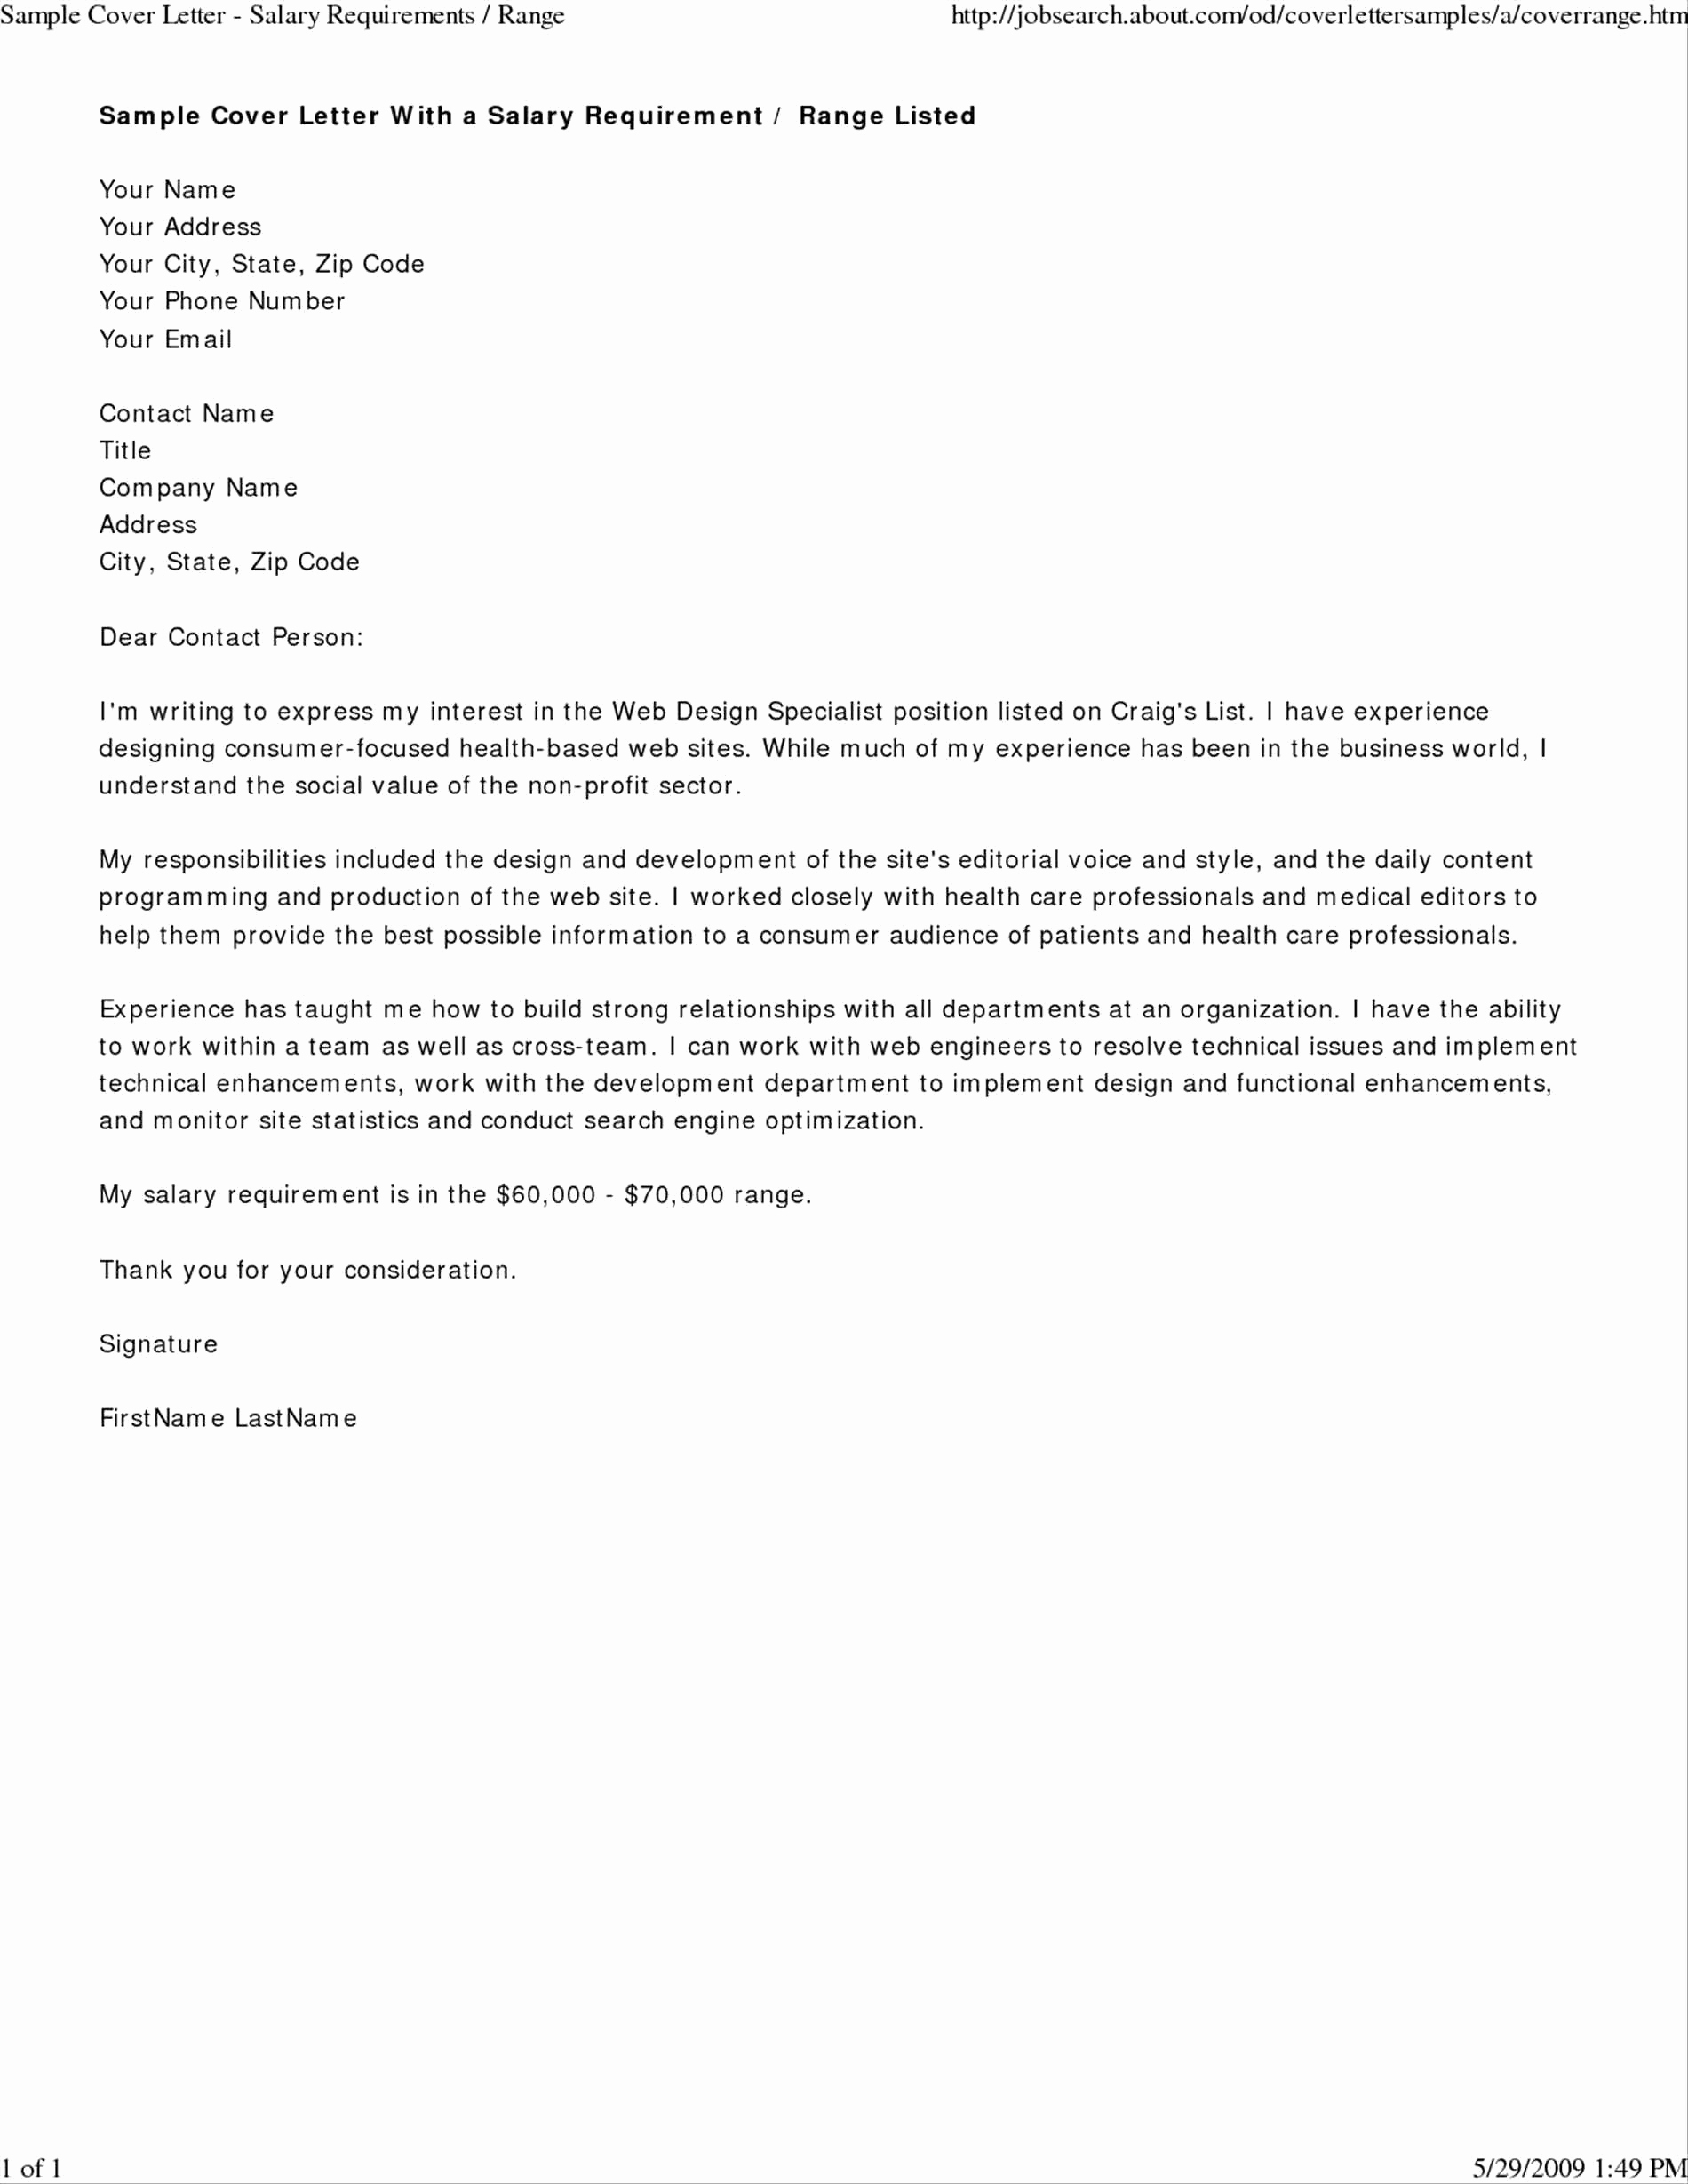 Car Insurance Cancellation Letter Template - Air Canada Cover Letter Best Auto Insurance Policy Sample Luxury